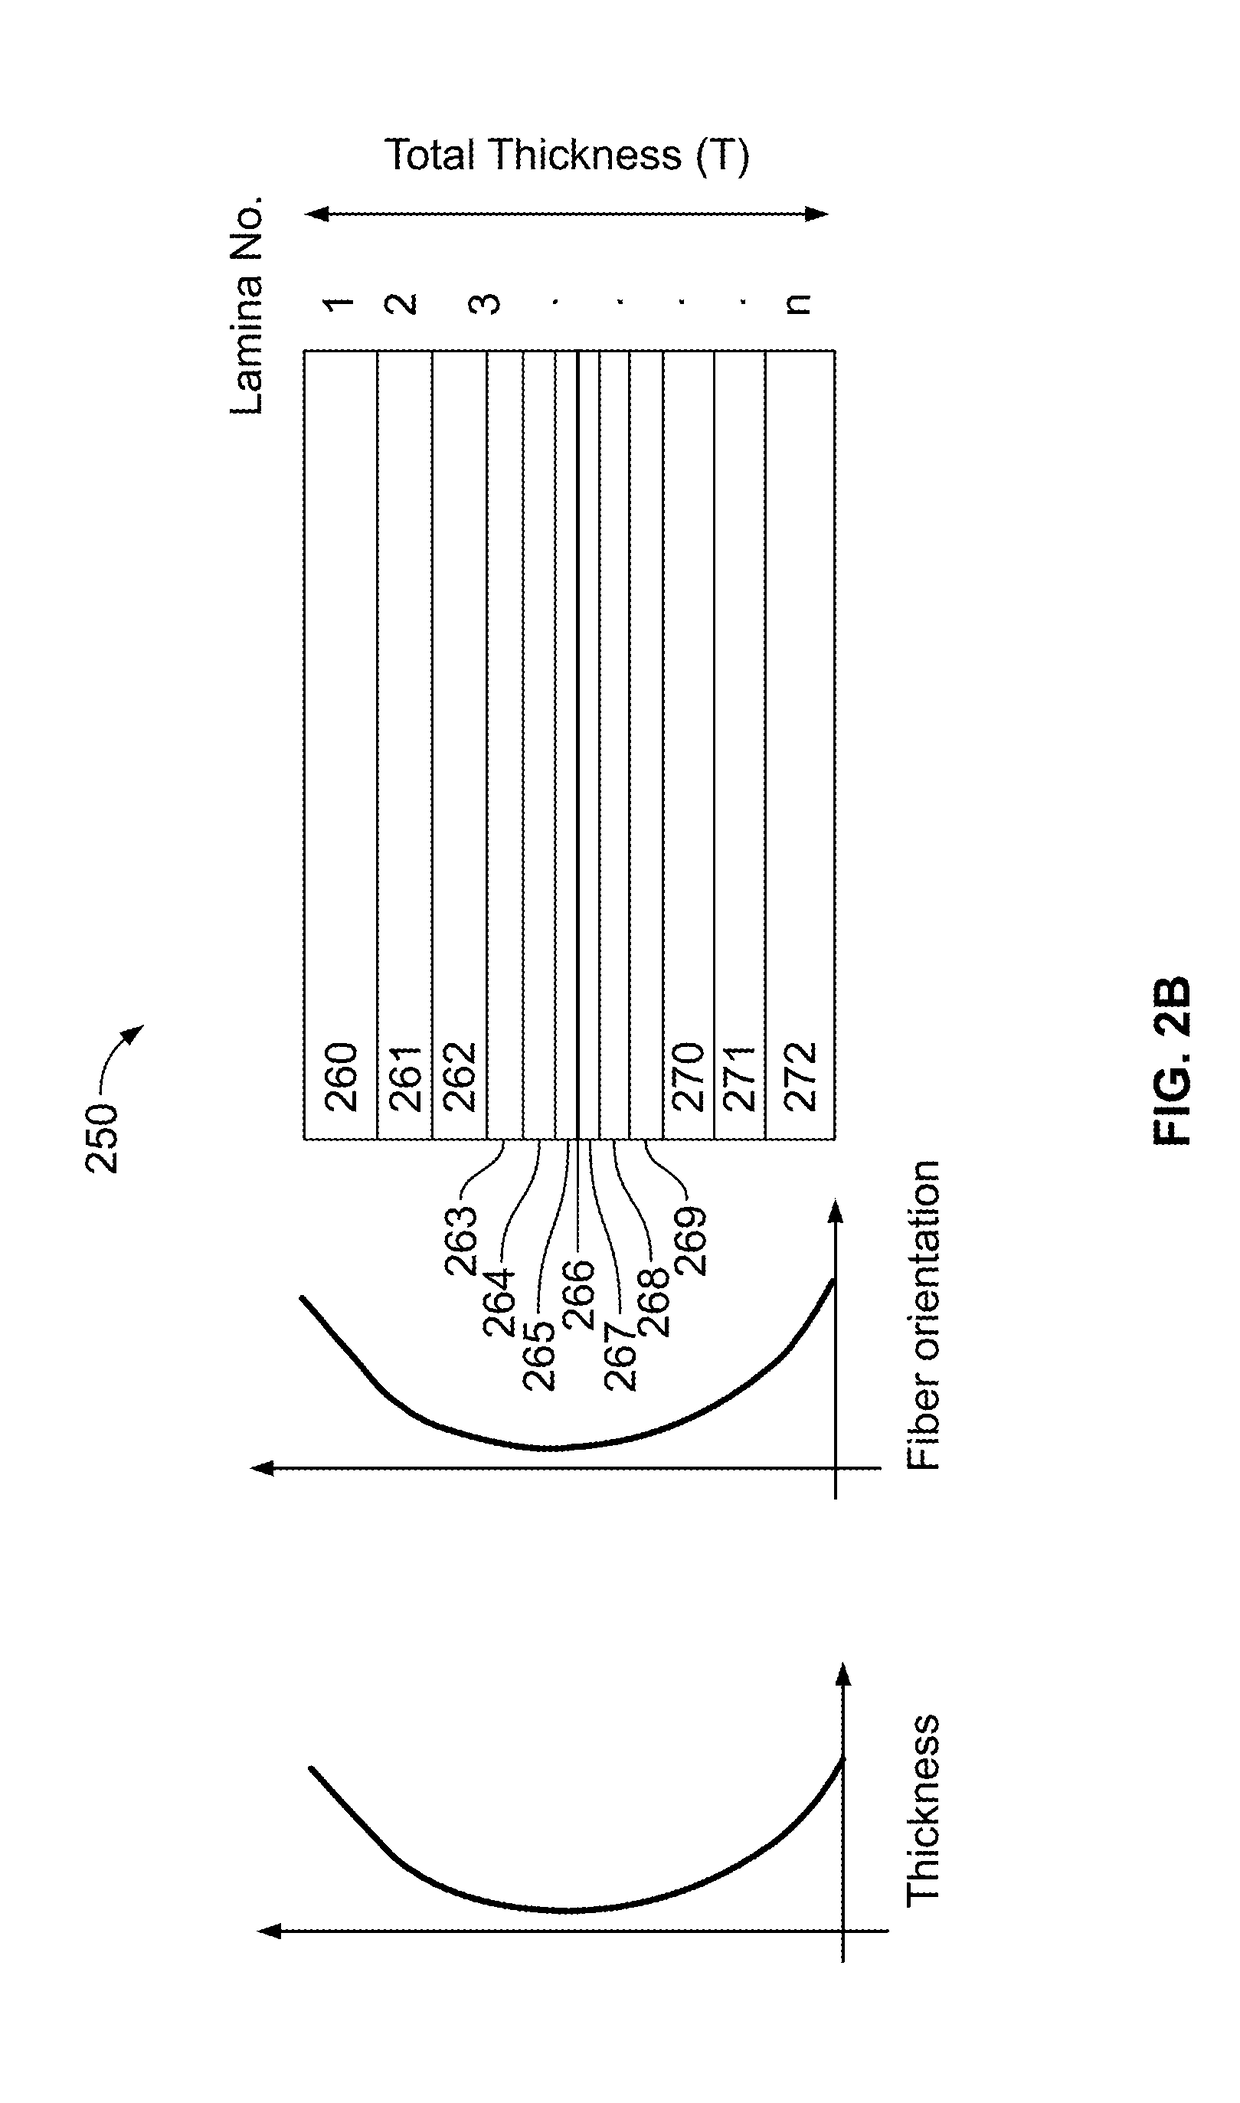 Ductile Fiber Reinforced Polymer Plates and Bars Using Mono-Type Fibers